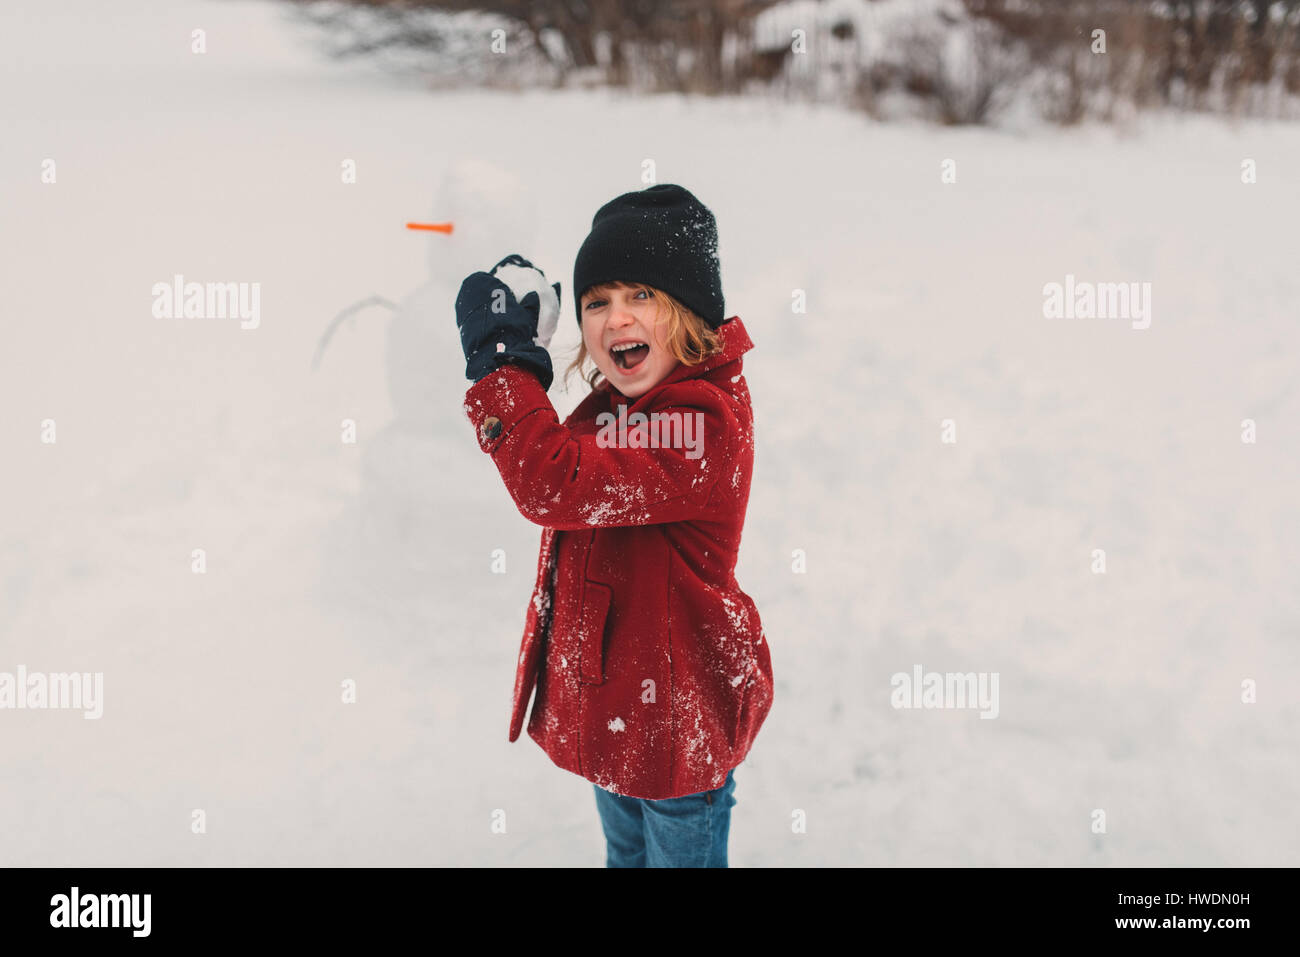 Girl getting ready to throw snowball Stock Photo